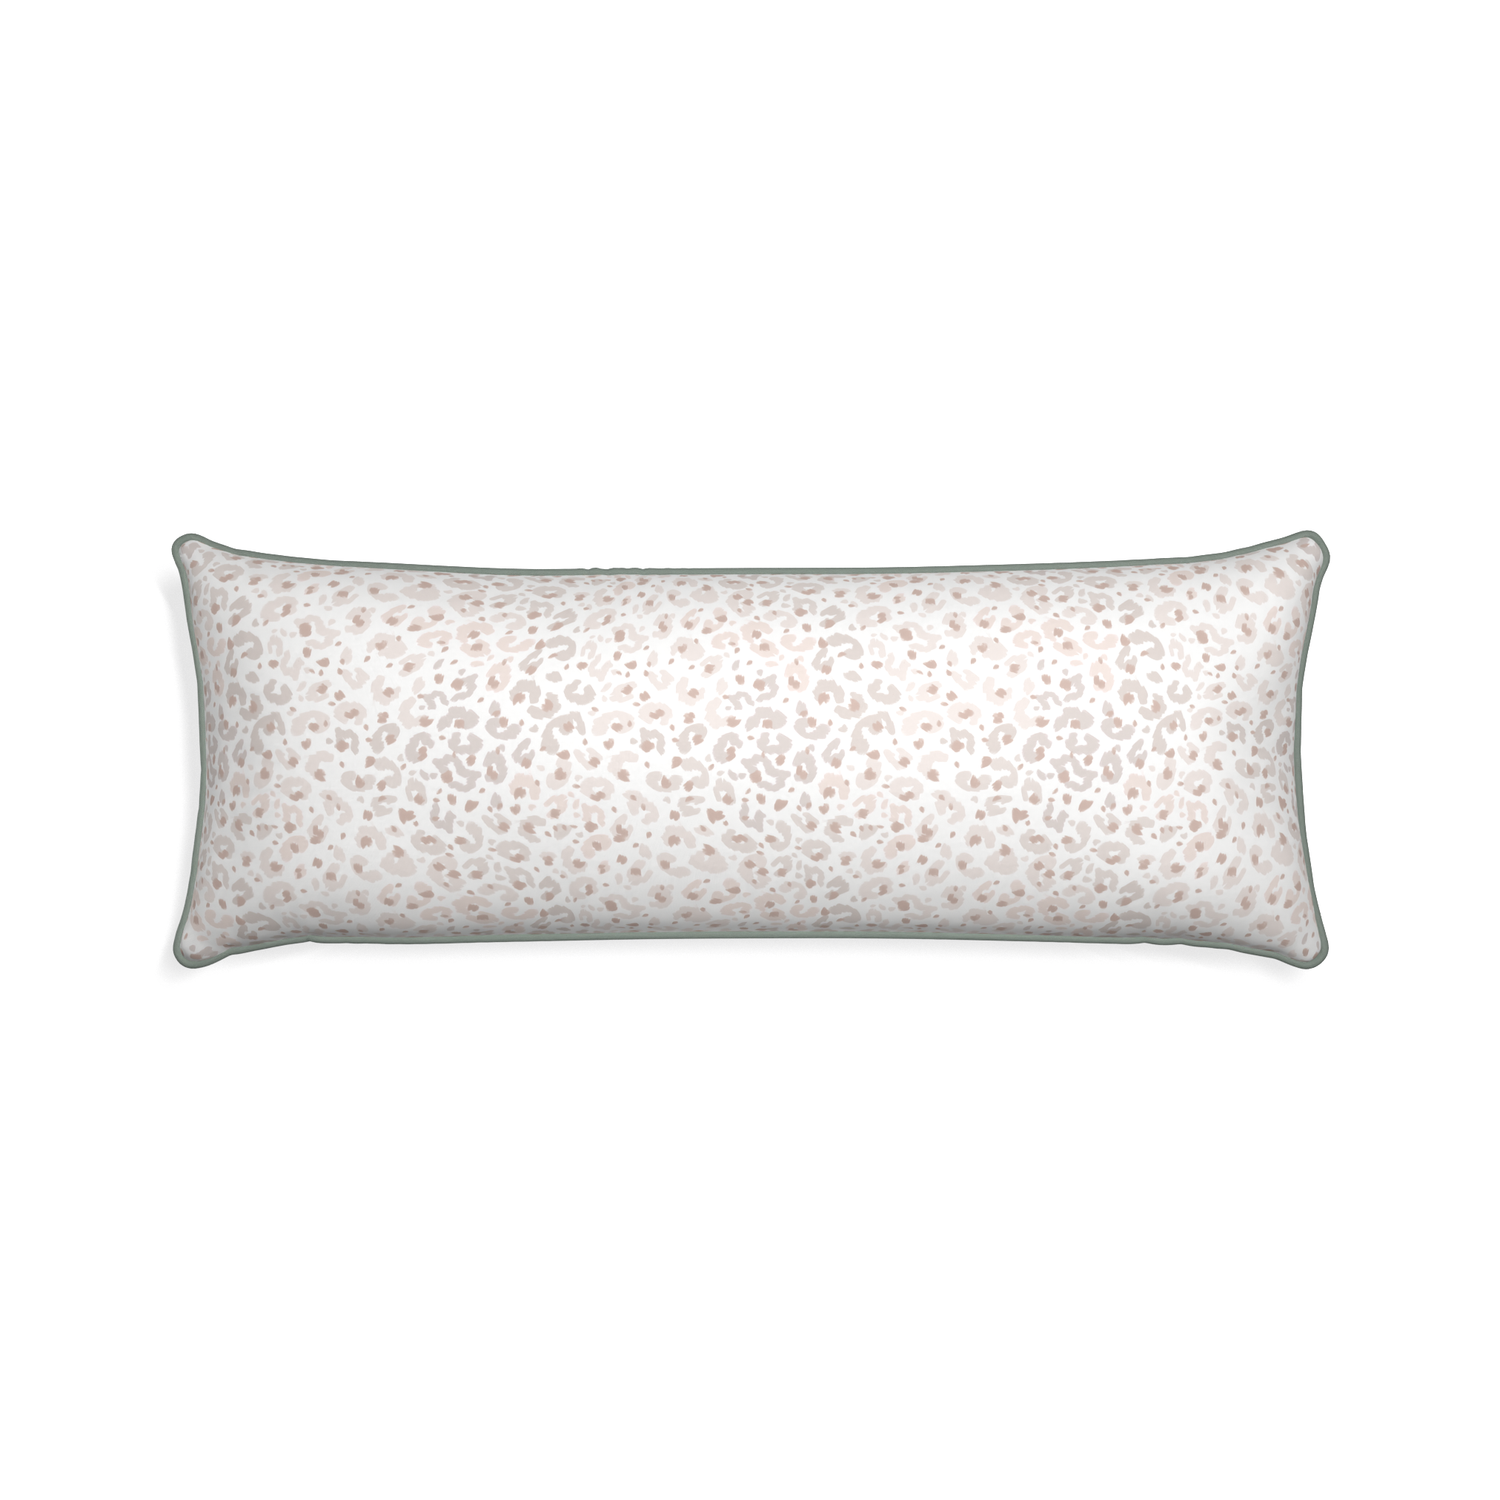 Xl-lumbar rosie custom beige animal printpillow with sage piping on white background